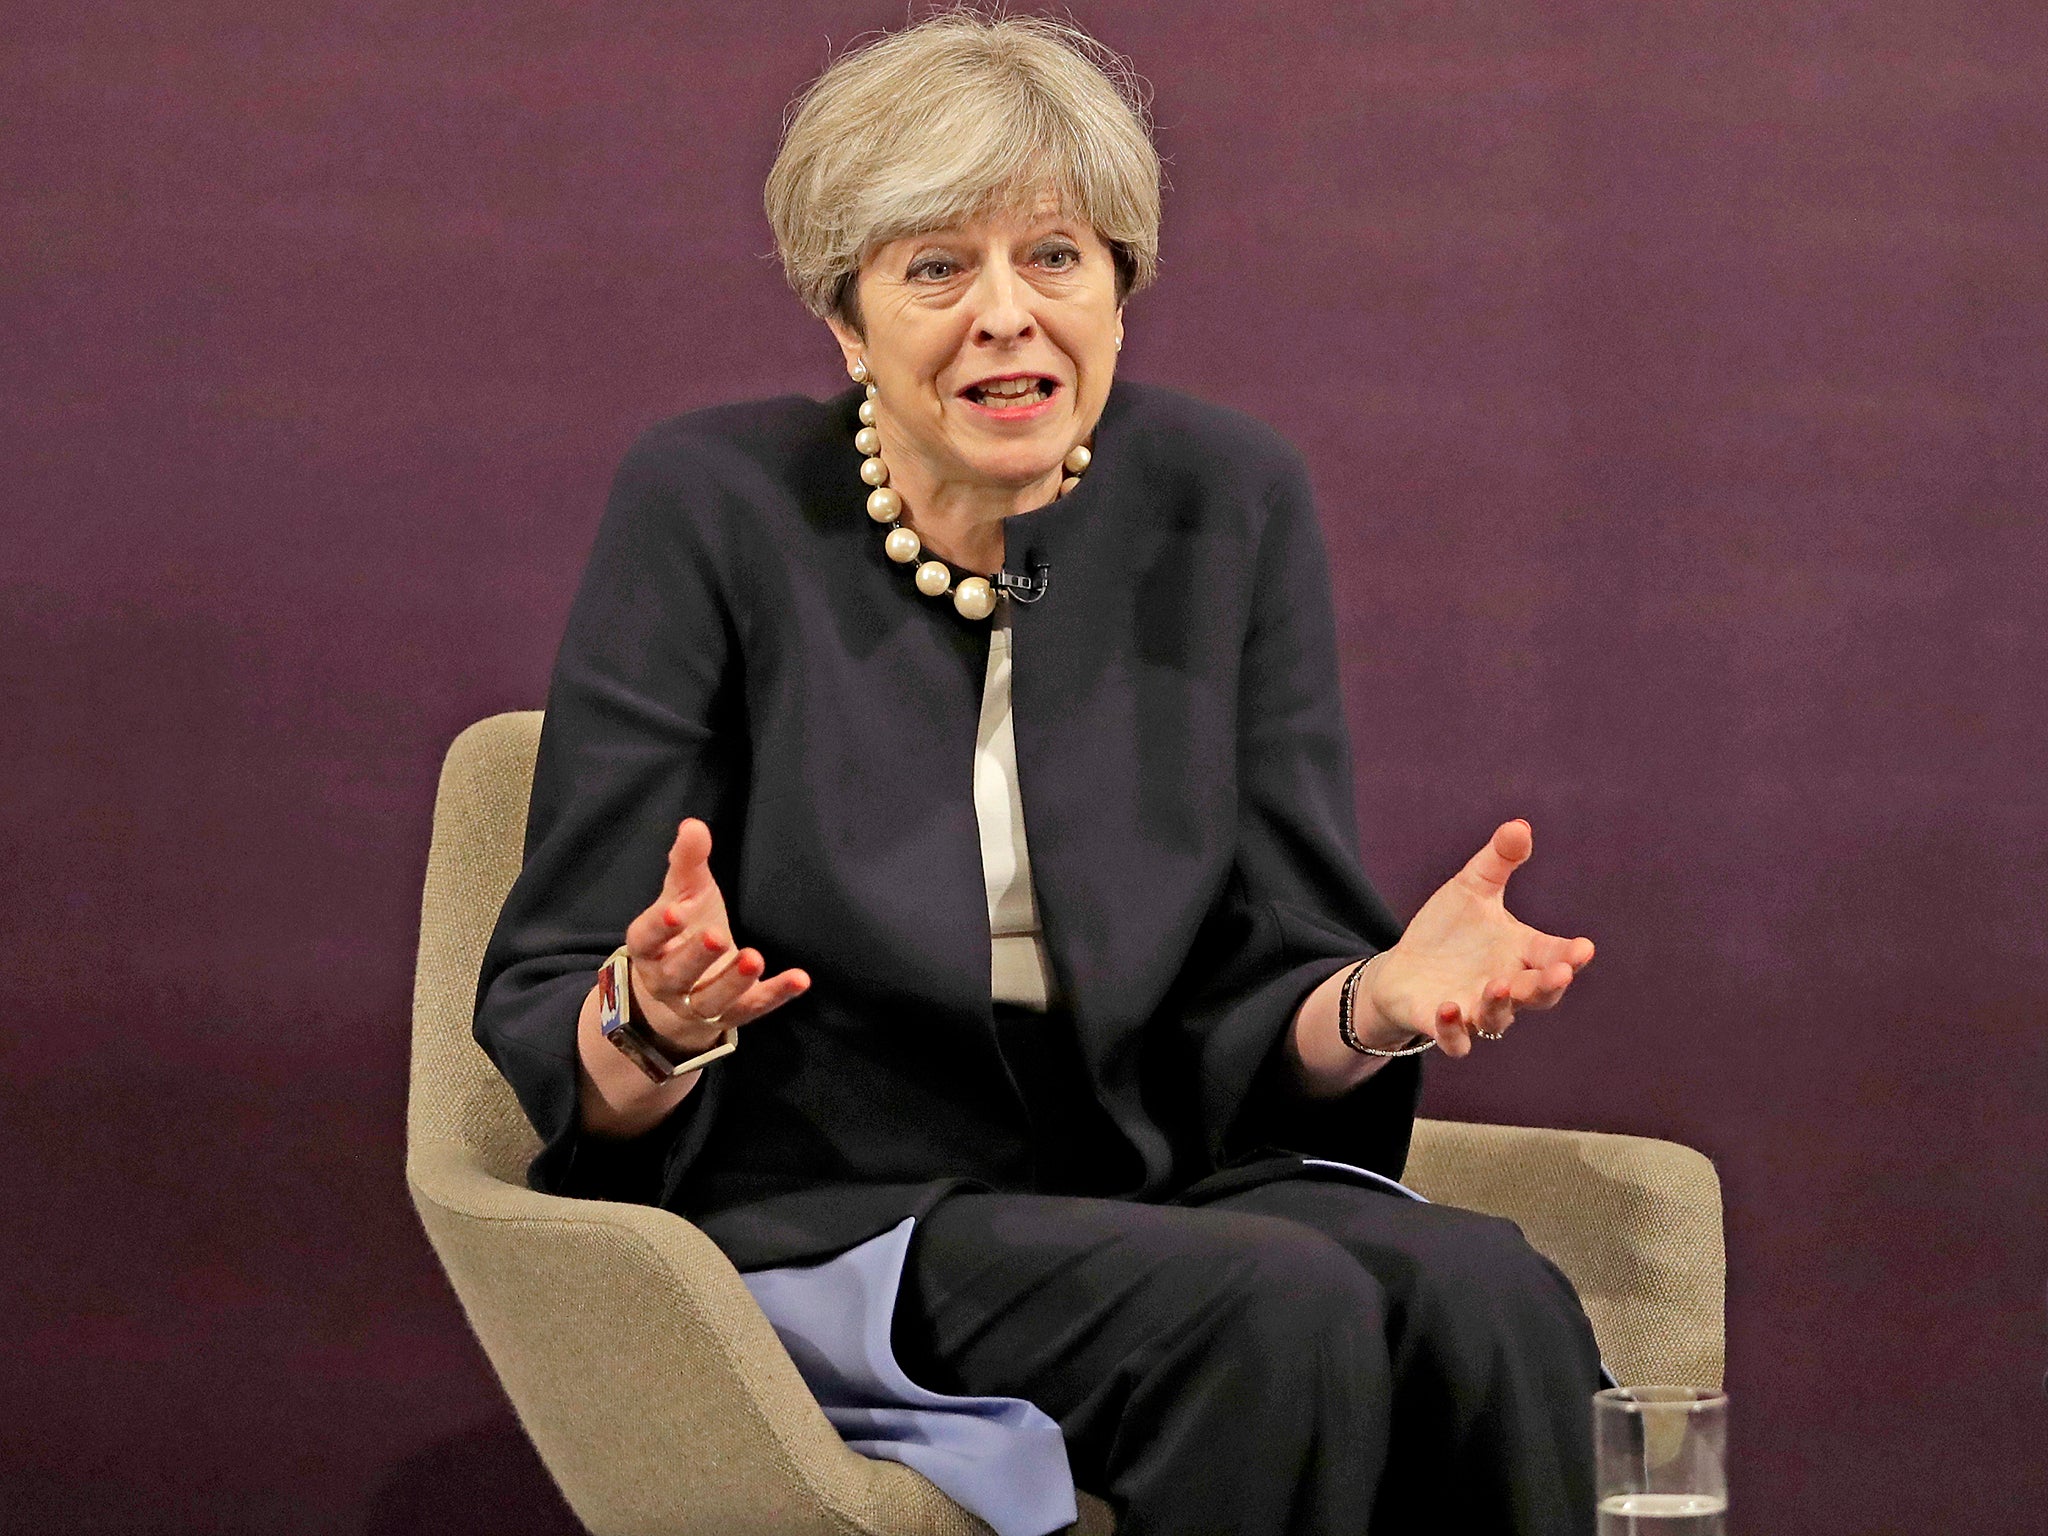 Theresa May gave a speech today on the gig economy